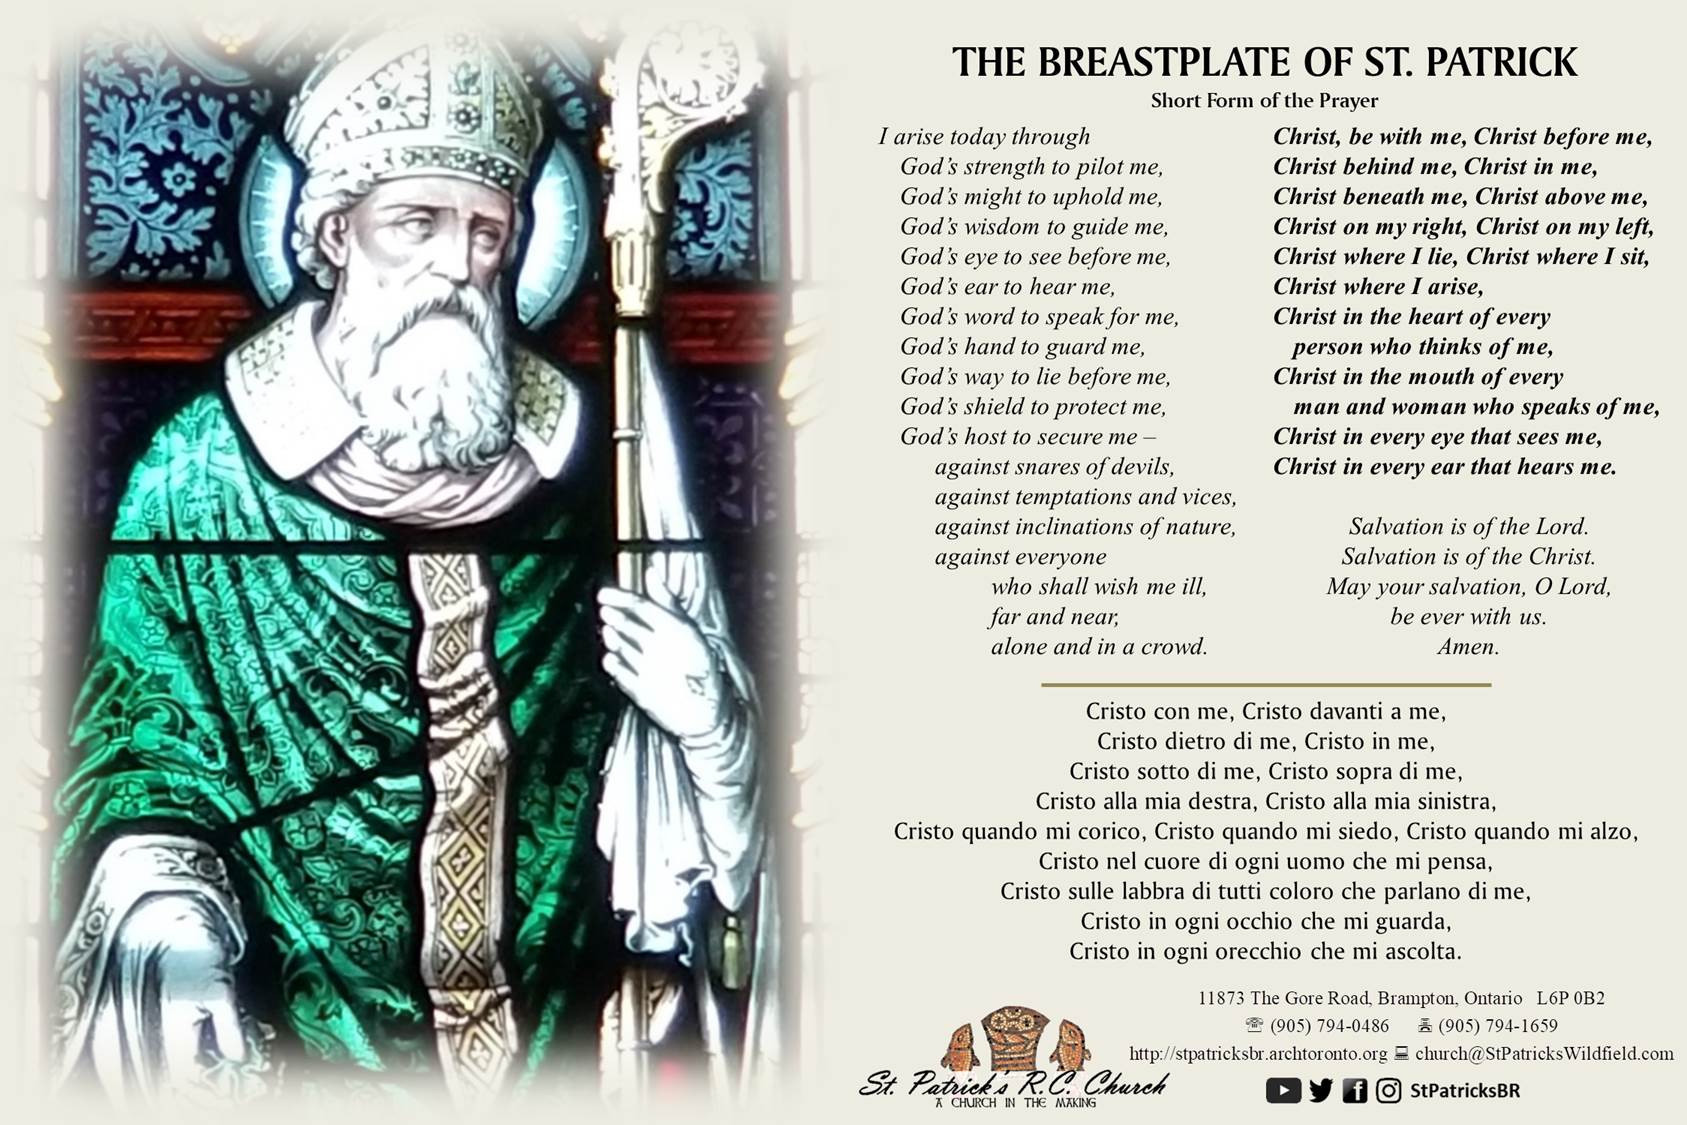 The Breastplate of St. Patrick